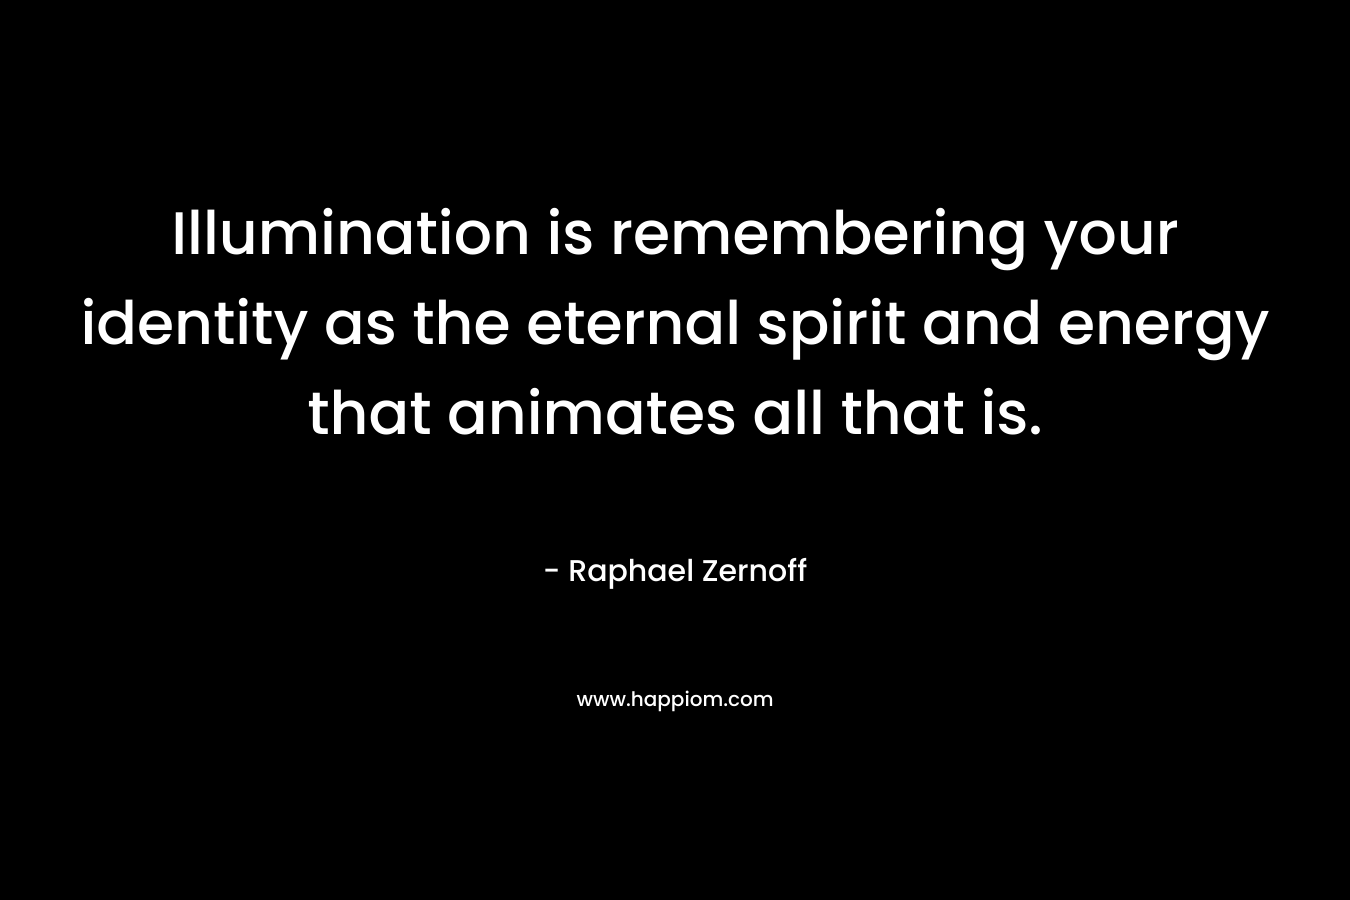 Illumination is remembering your identity as the eternal spirit and energy that animates all that is.